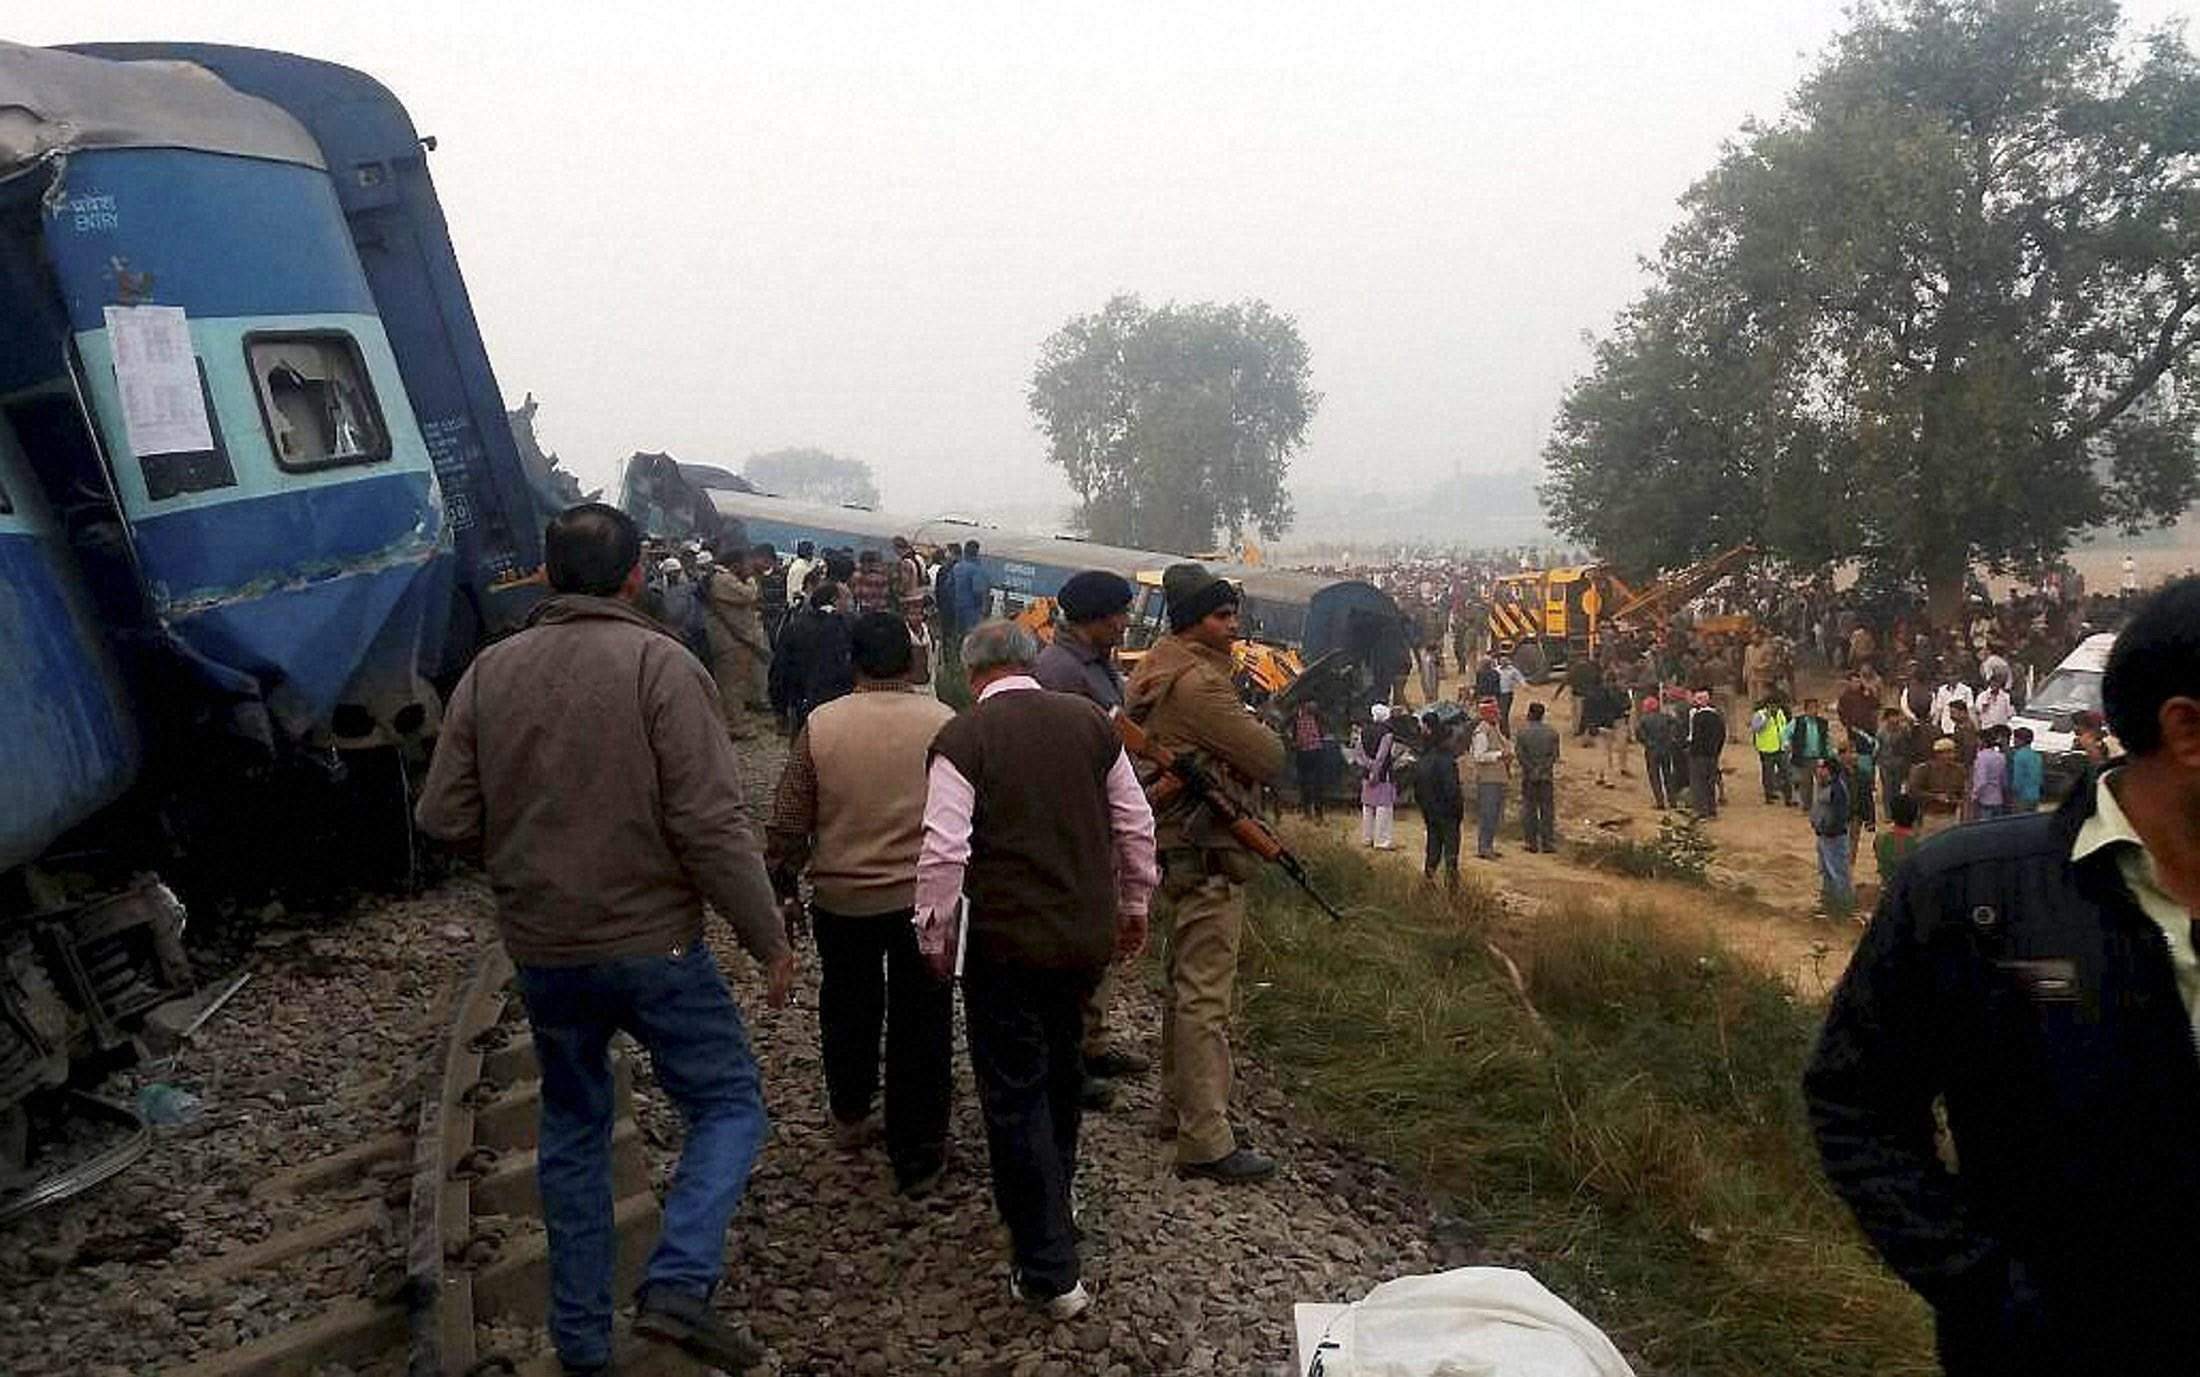 Kanpur train accident was conspiracy from across the border: PM